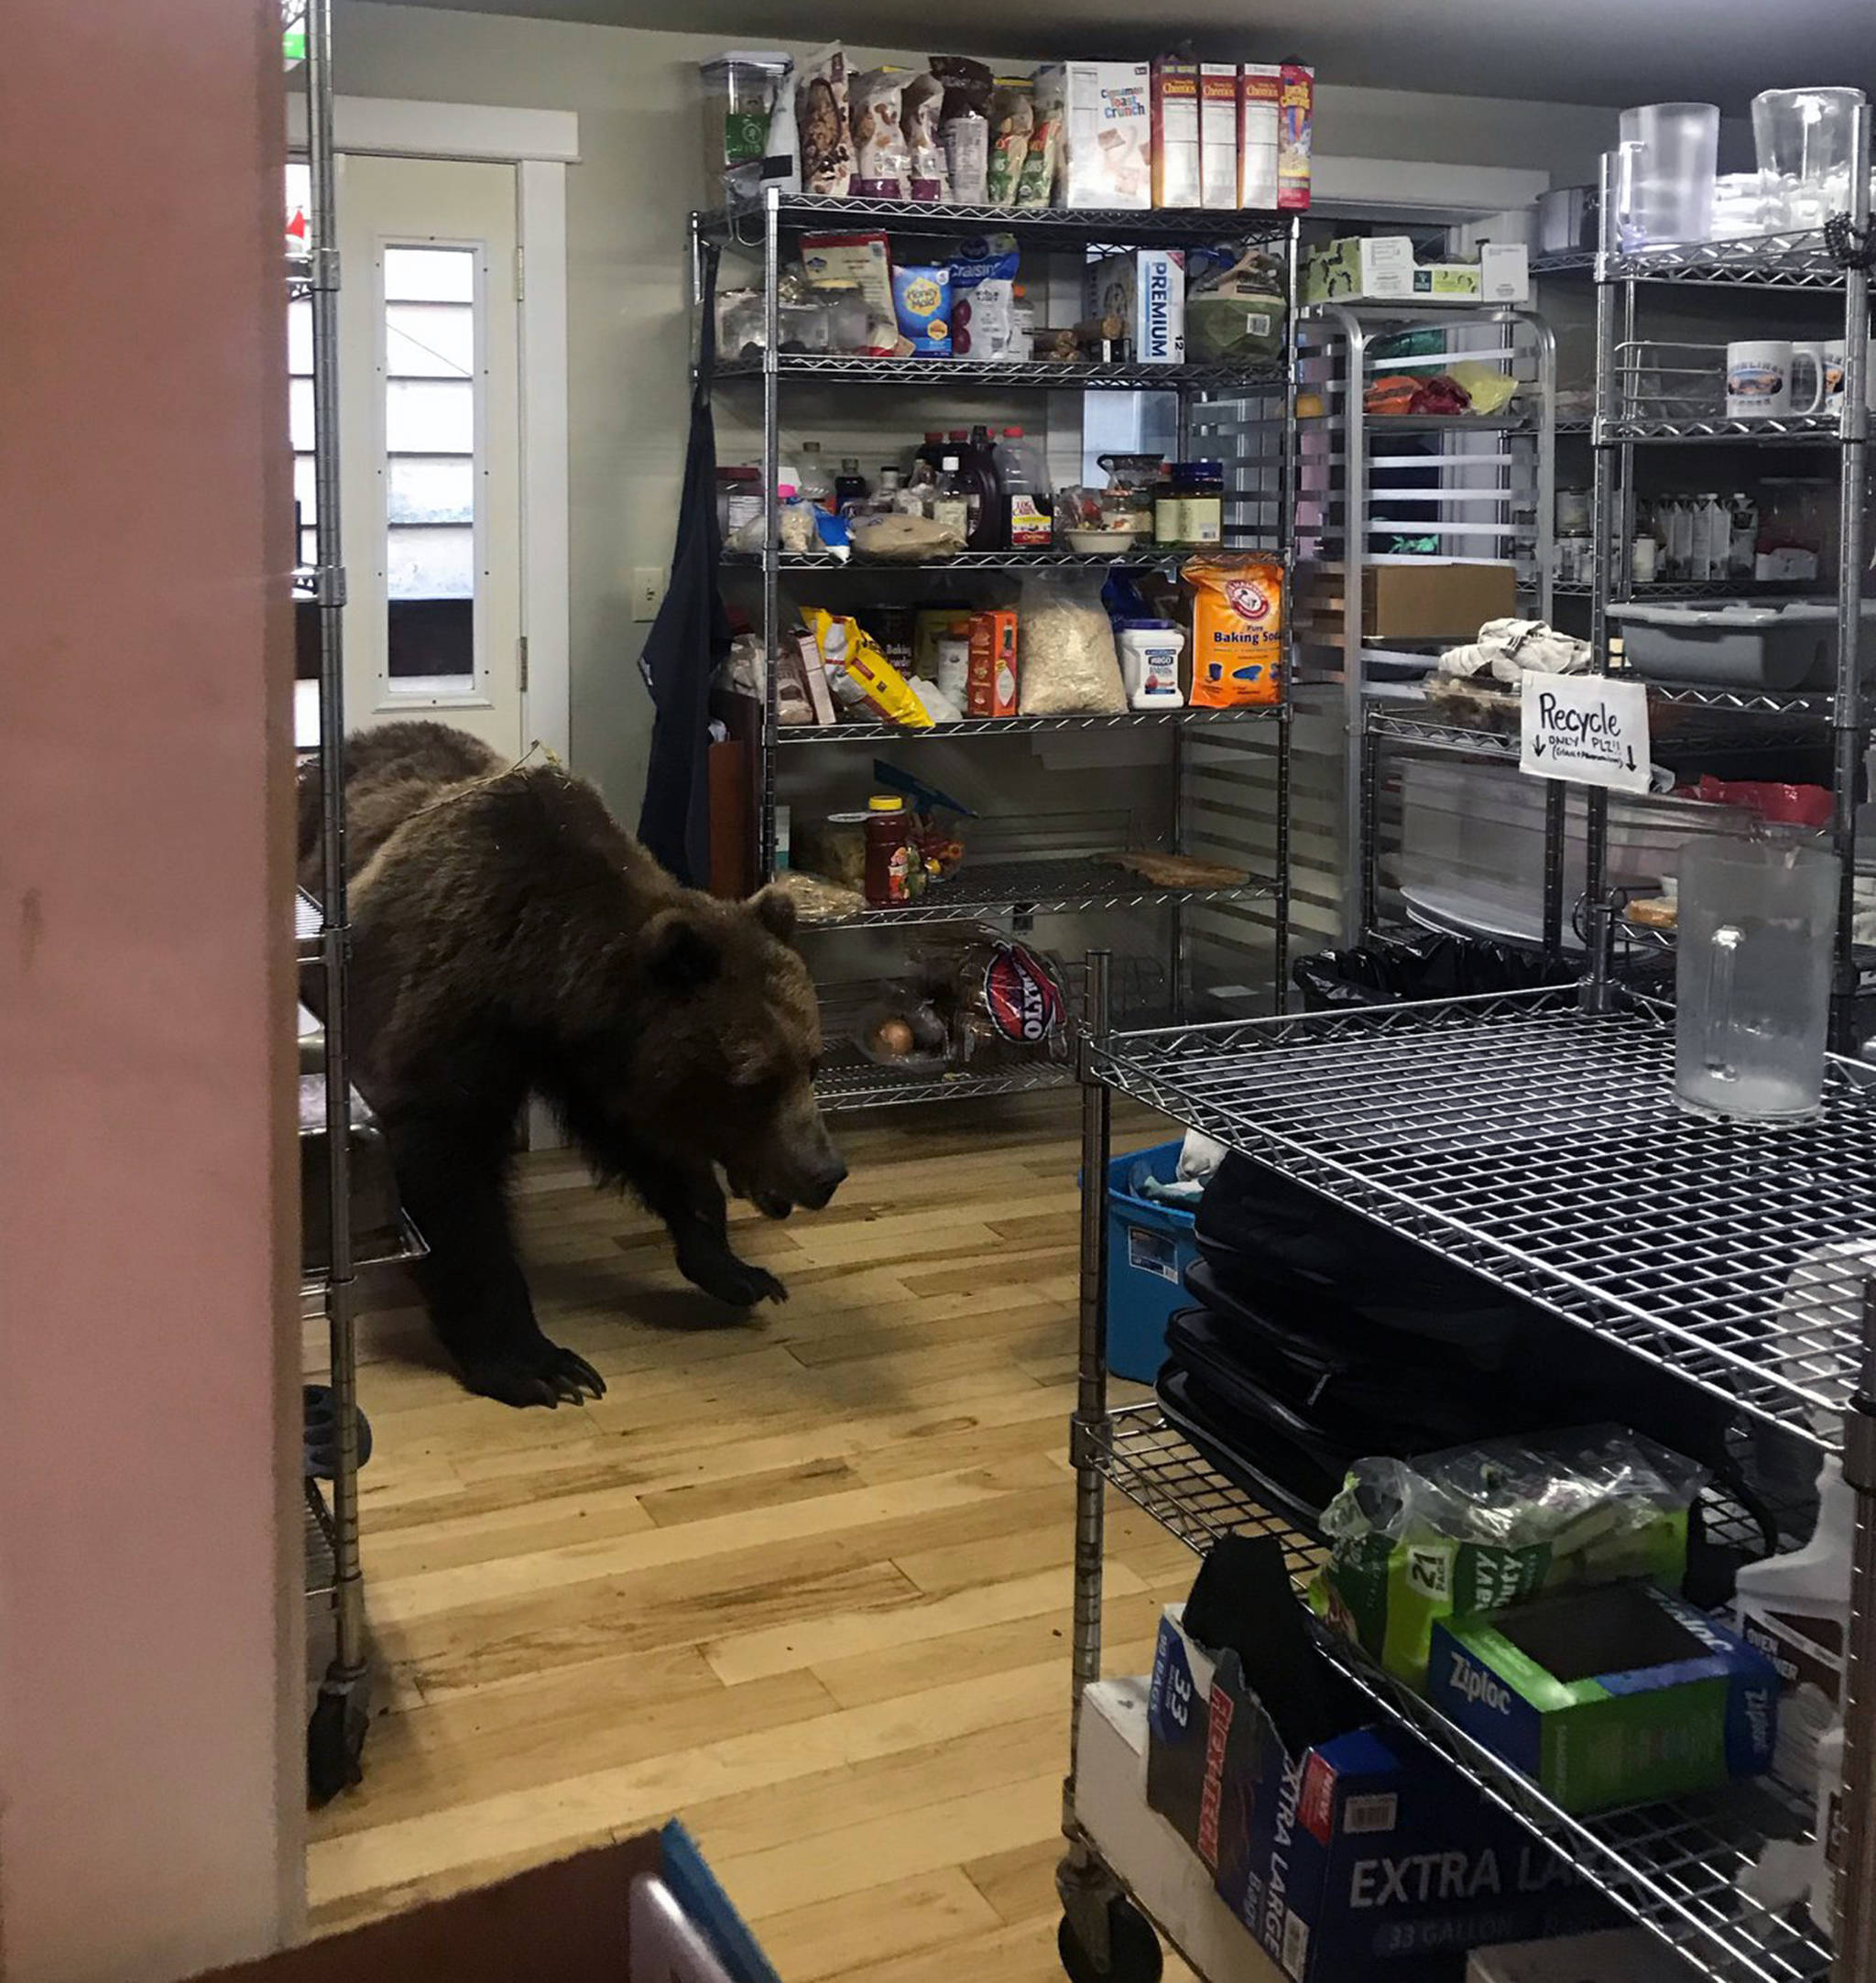 A brown bear walks into the Highliner Lodge’s kitchen on Saturday, June 29, 2019. (Courtesy photo | Steve Daniels)